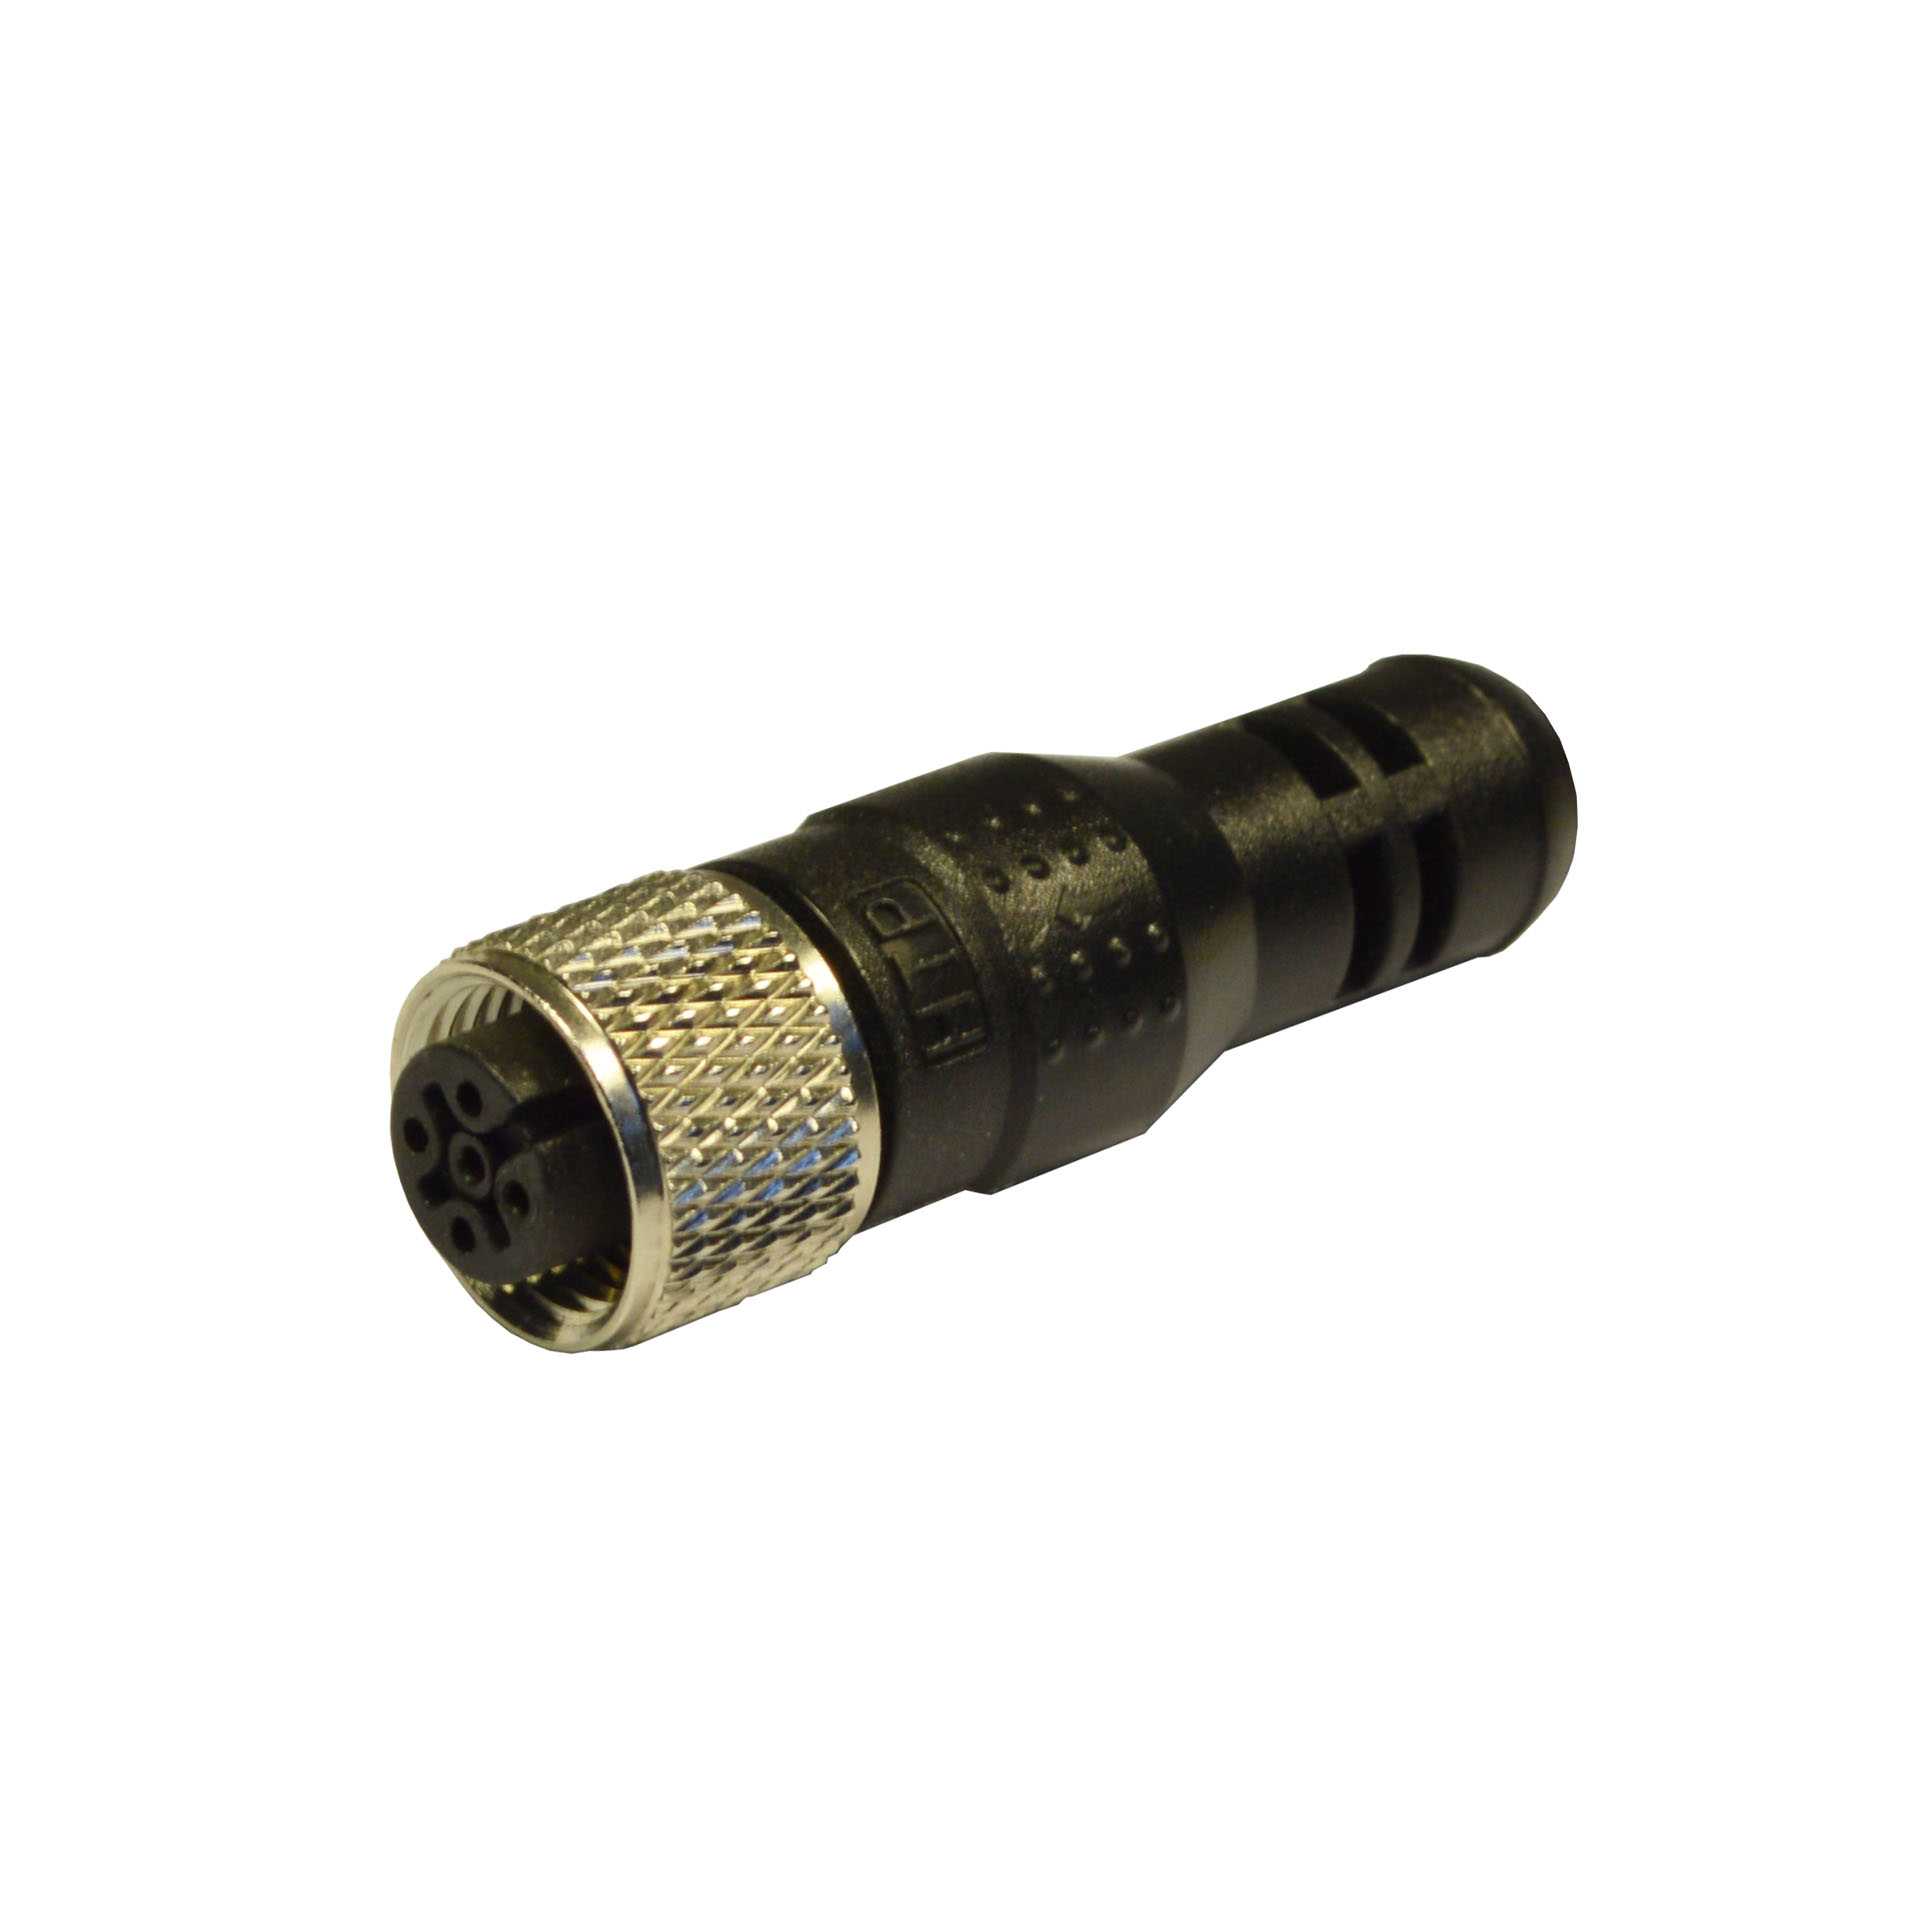 Terminal connector M12 Female straight 180° 2poles with resistance 120Ohm between poles 4-5.